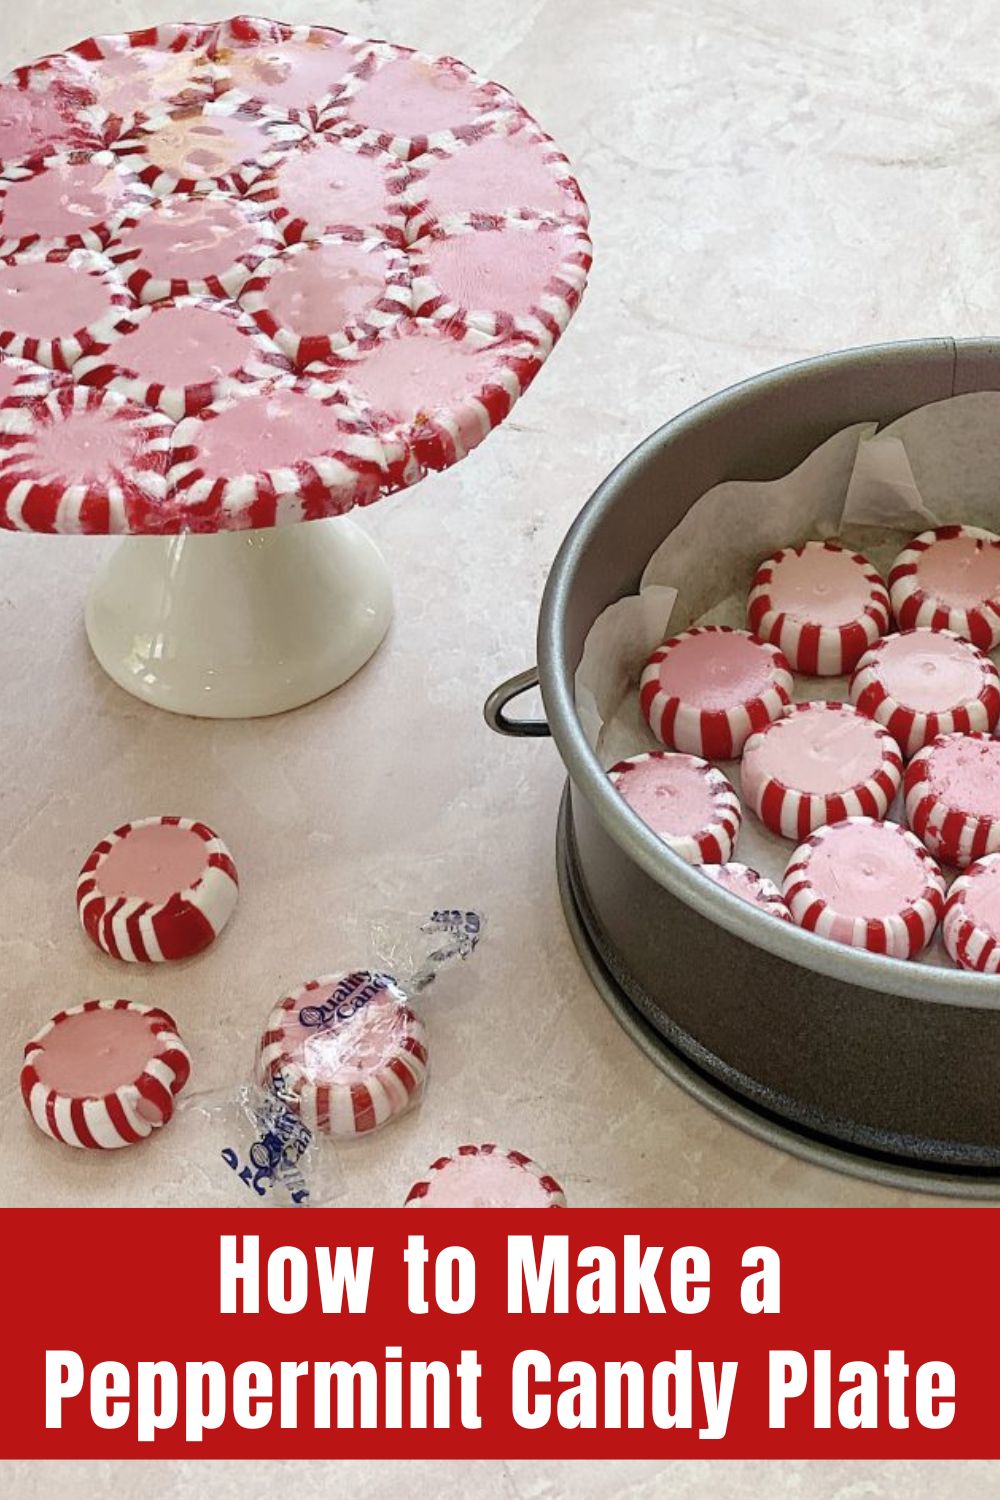 There is something so festive about peppermint candy at Christmas time. Did you know that you can use them to make a candy plate?